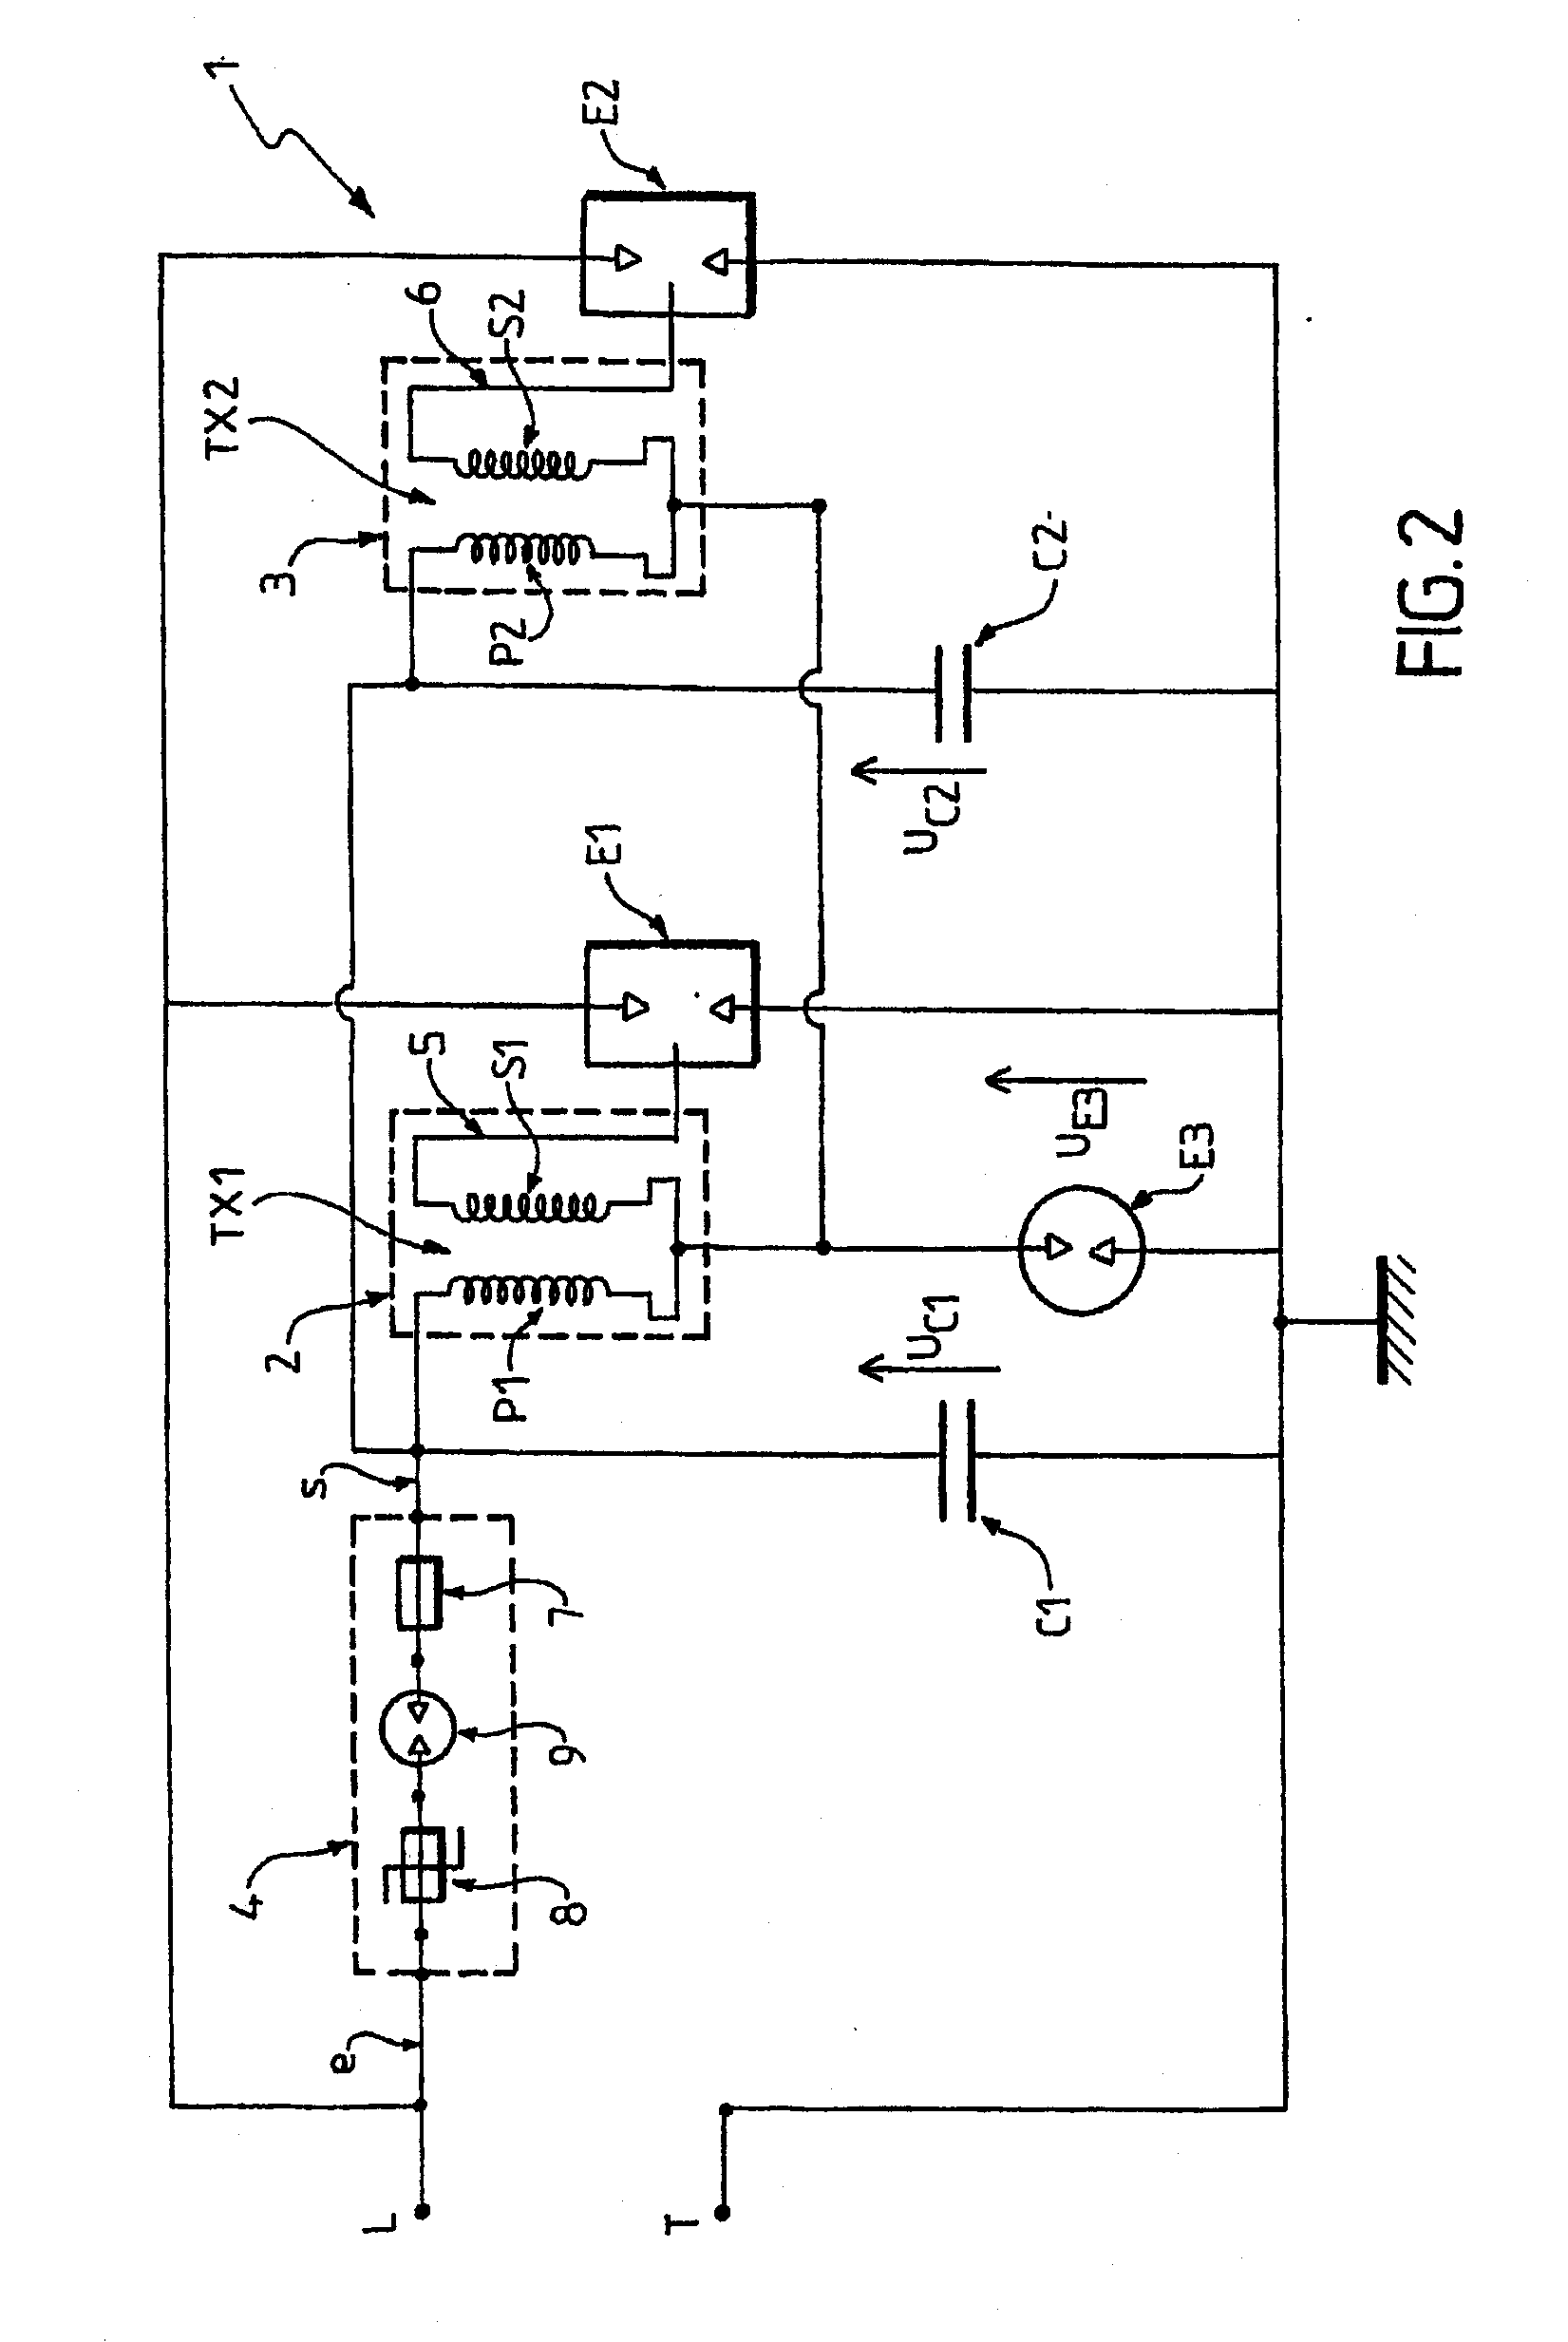 Surge protector device with simultaneously-triggered spark gaps in parallel